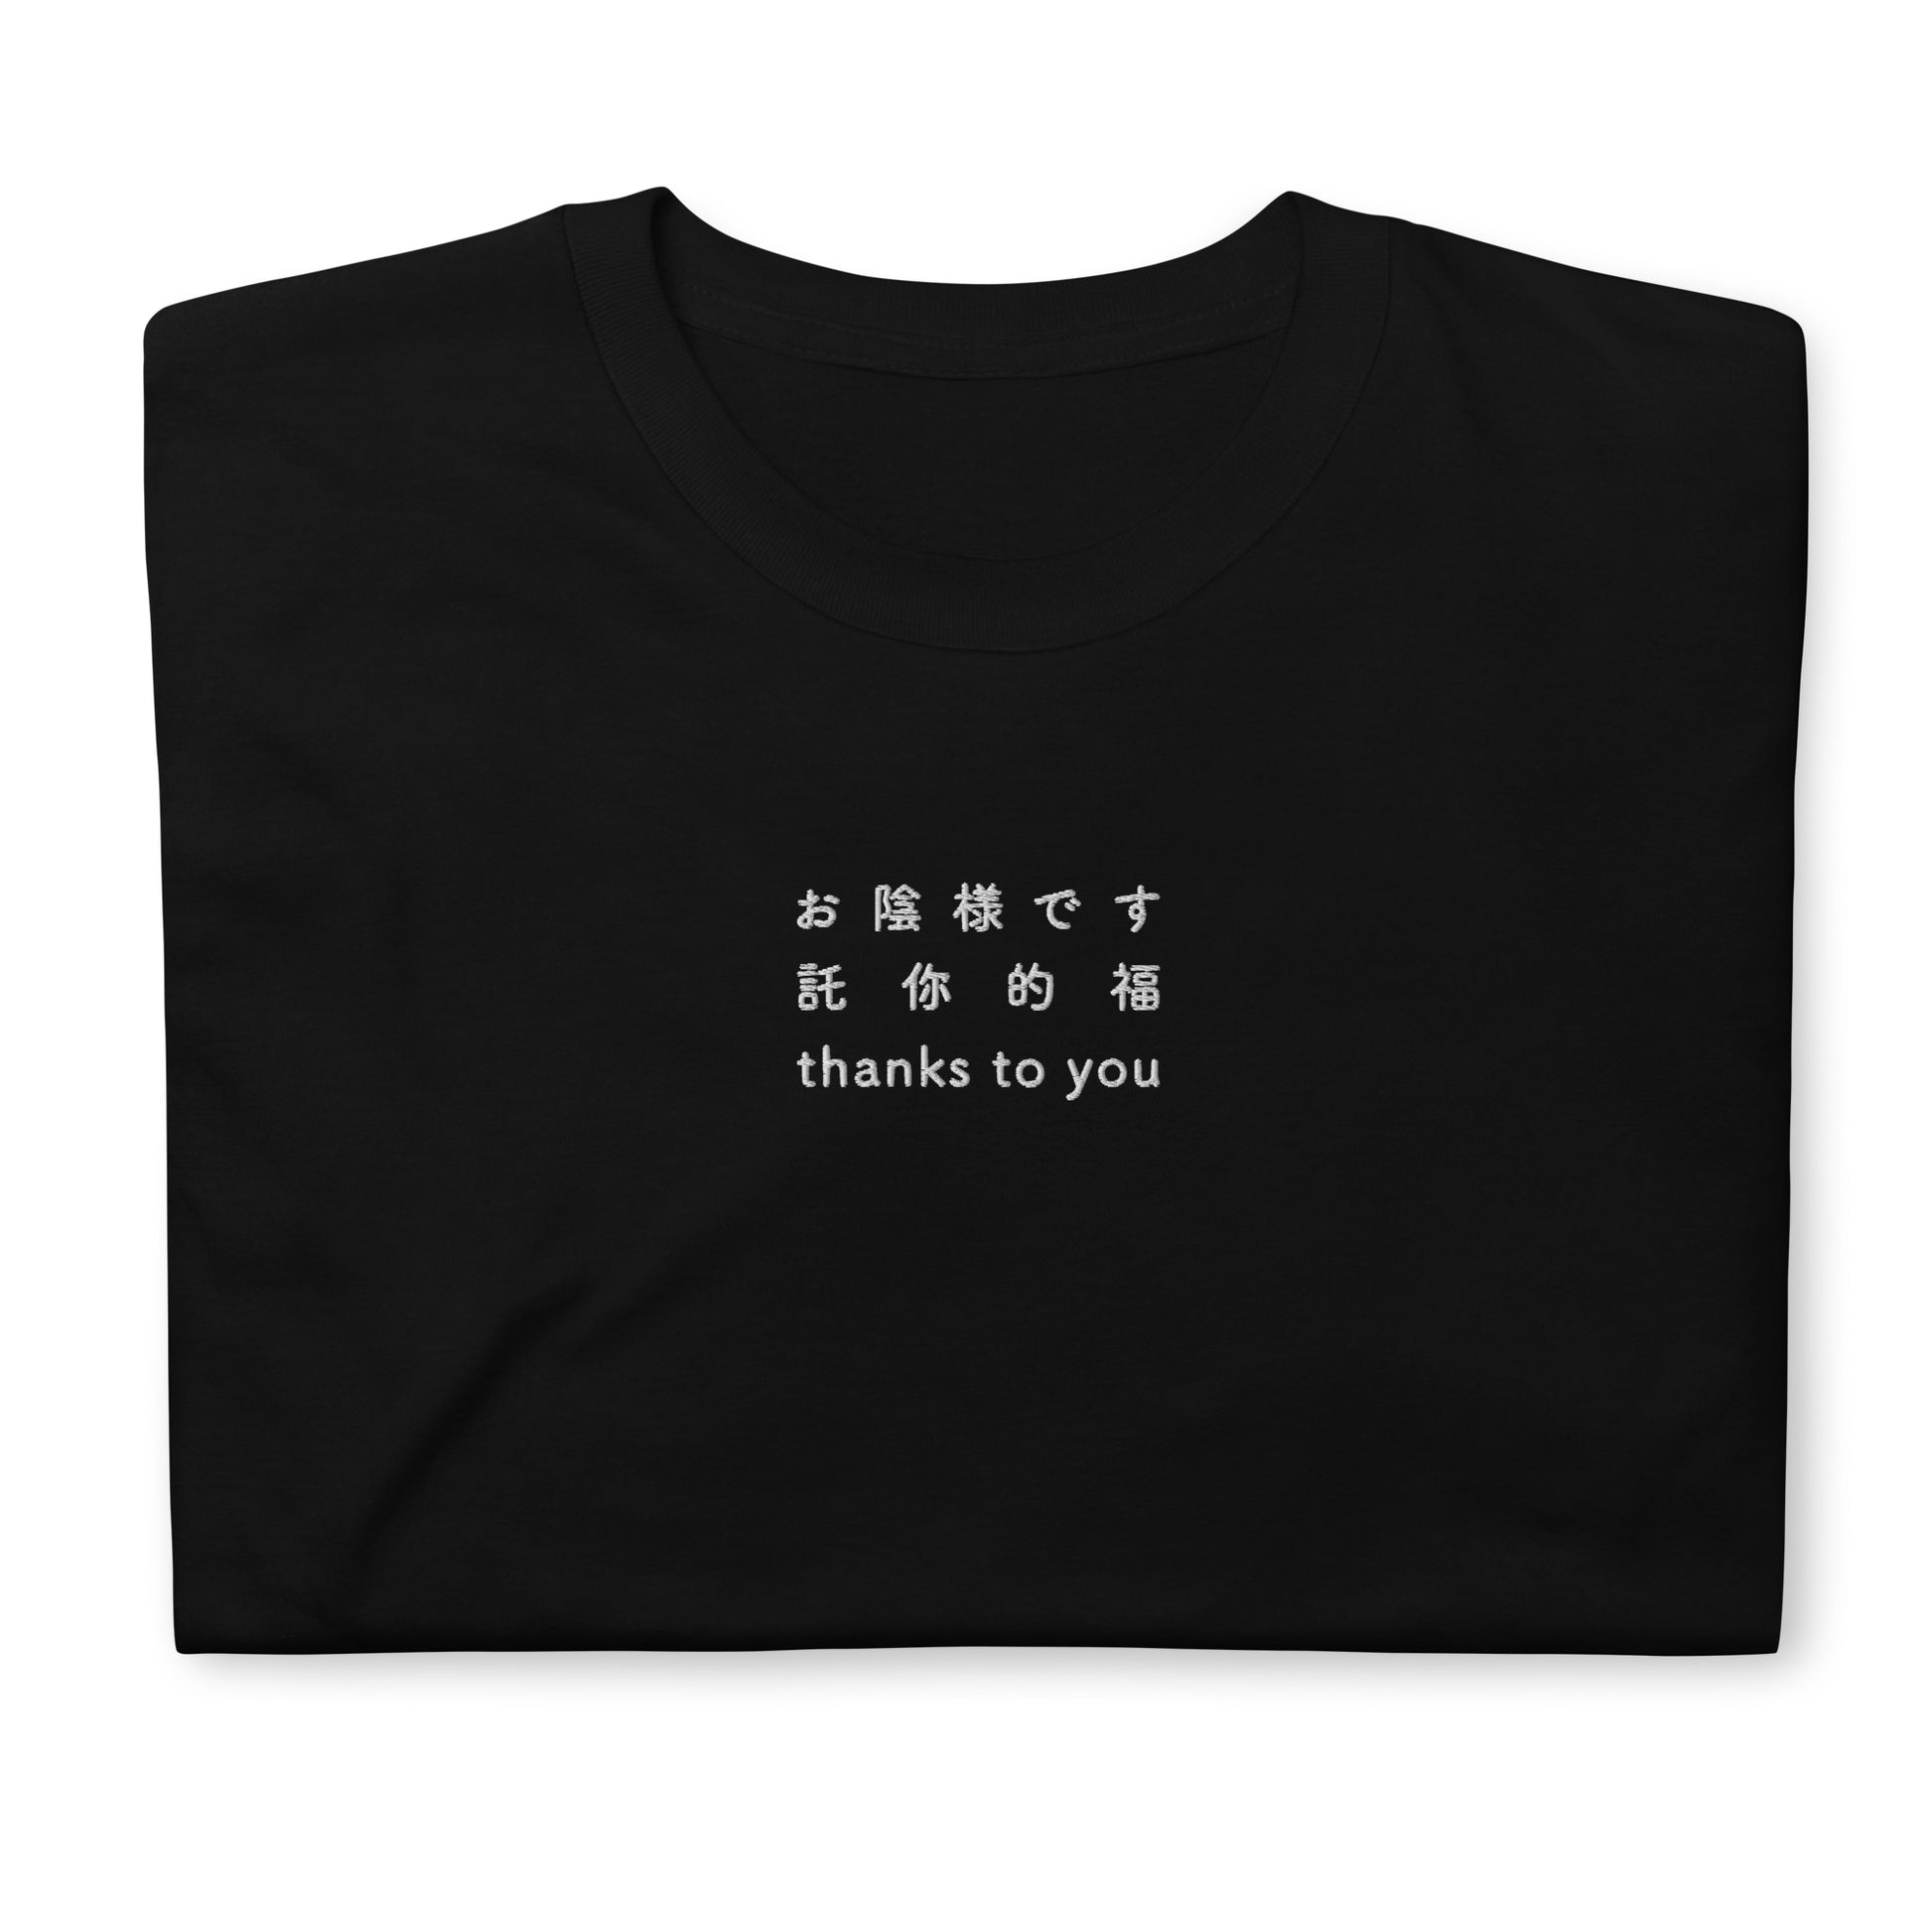 Black High Quality Tee - Front Design with an white Embroidery "thanks to you" in Japanese,Chinese and English